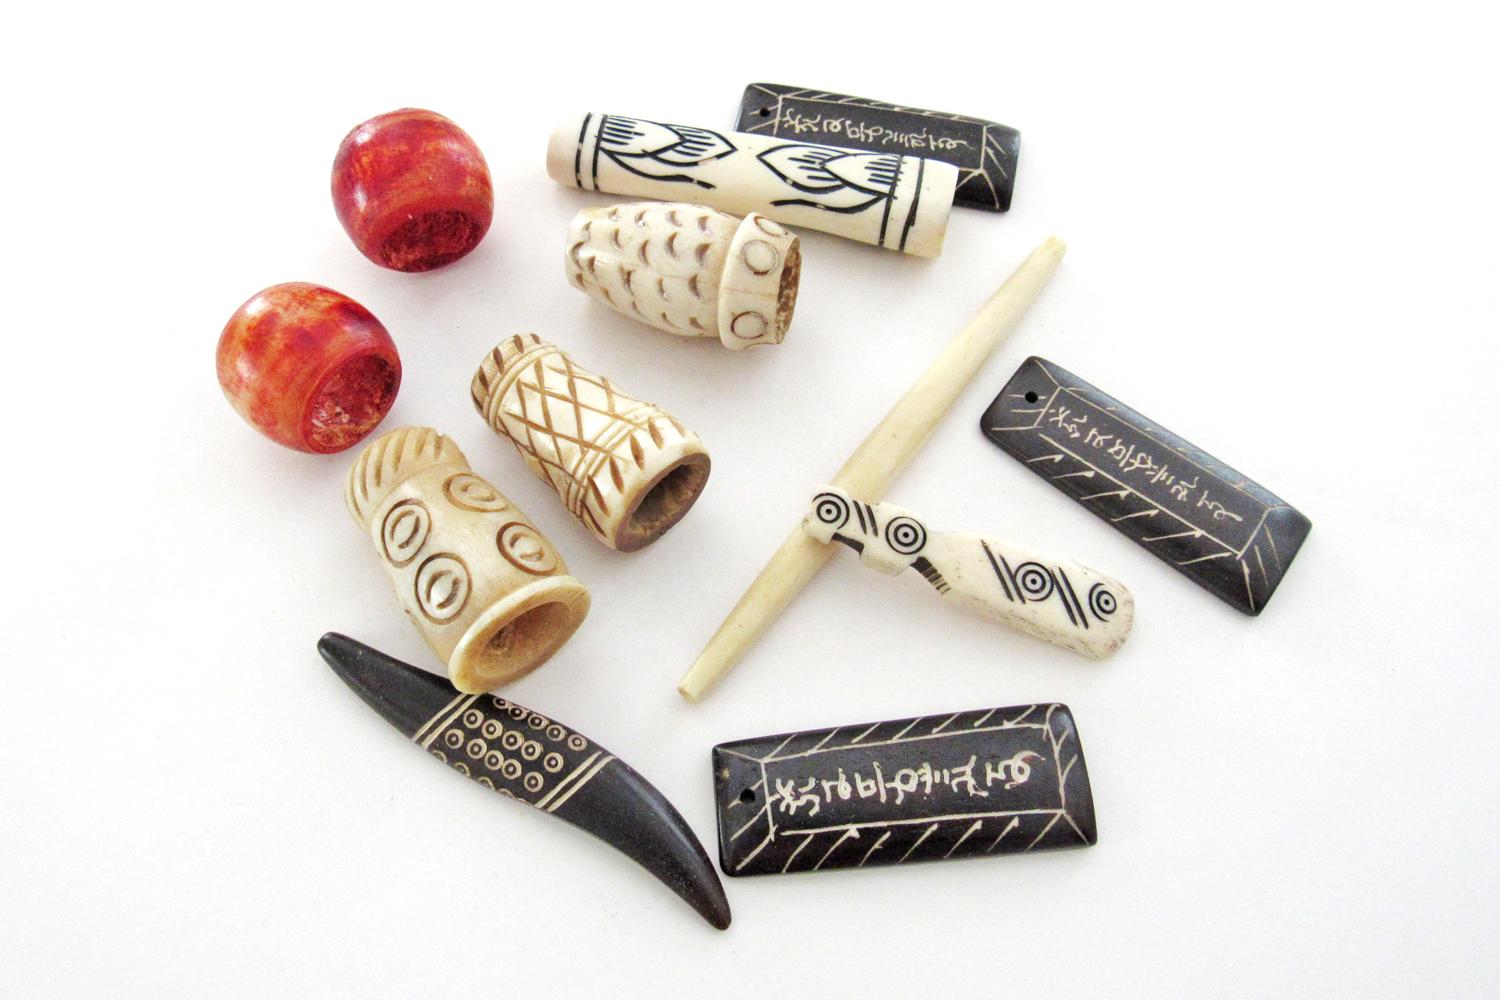  Ethnic Boho Tribal Style Carved Bone Bead Lot for Jewelry Making / Craft Supply